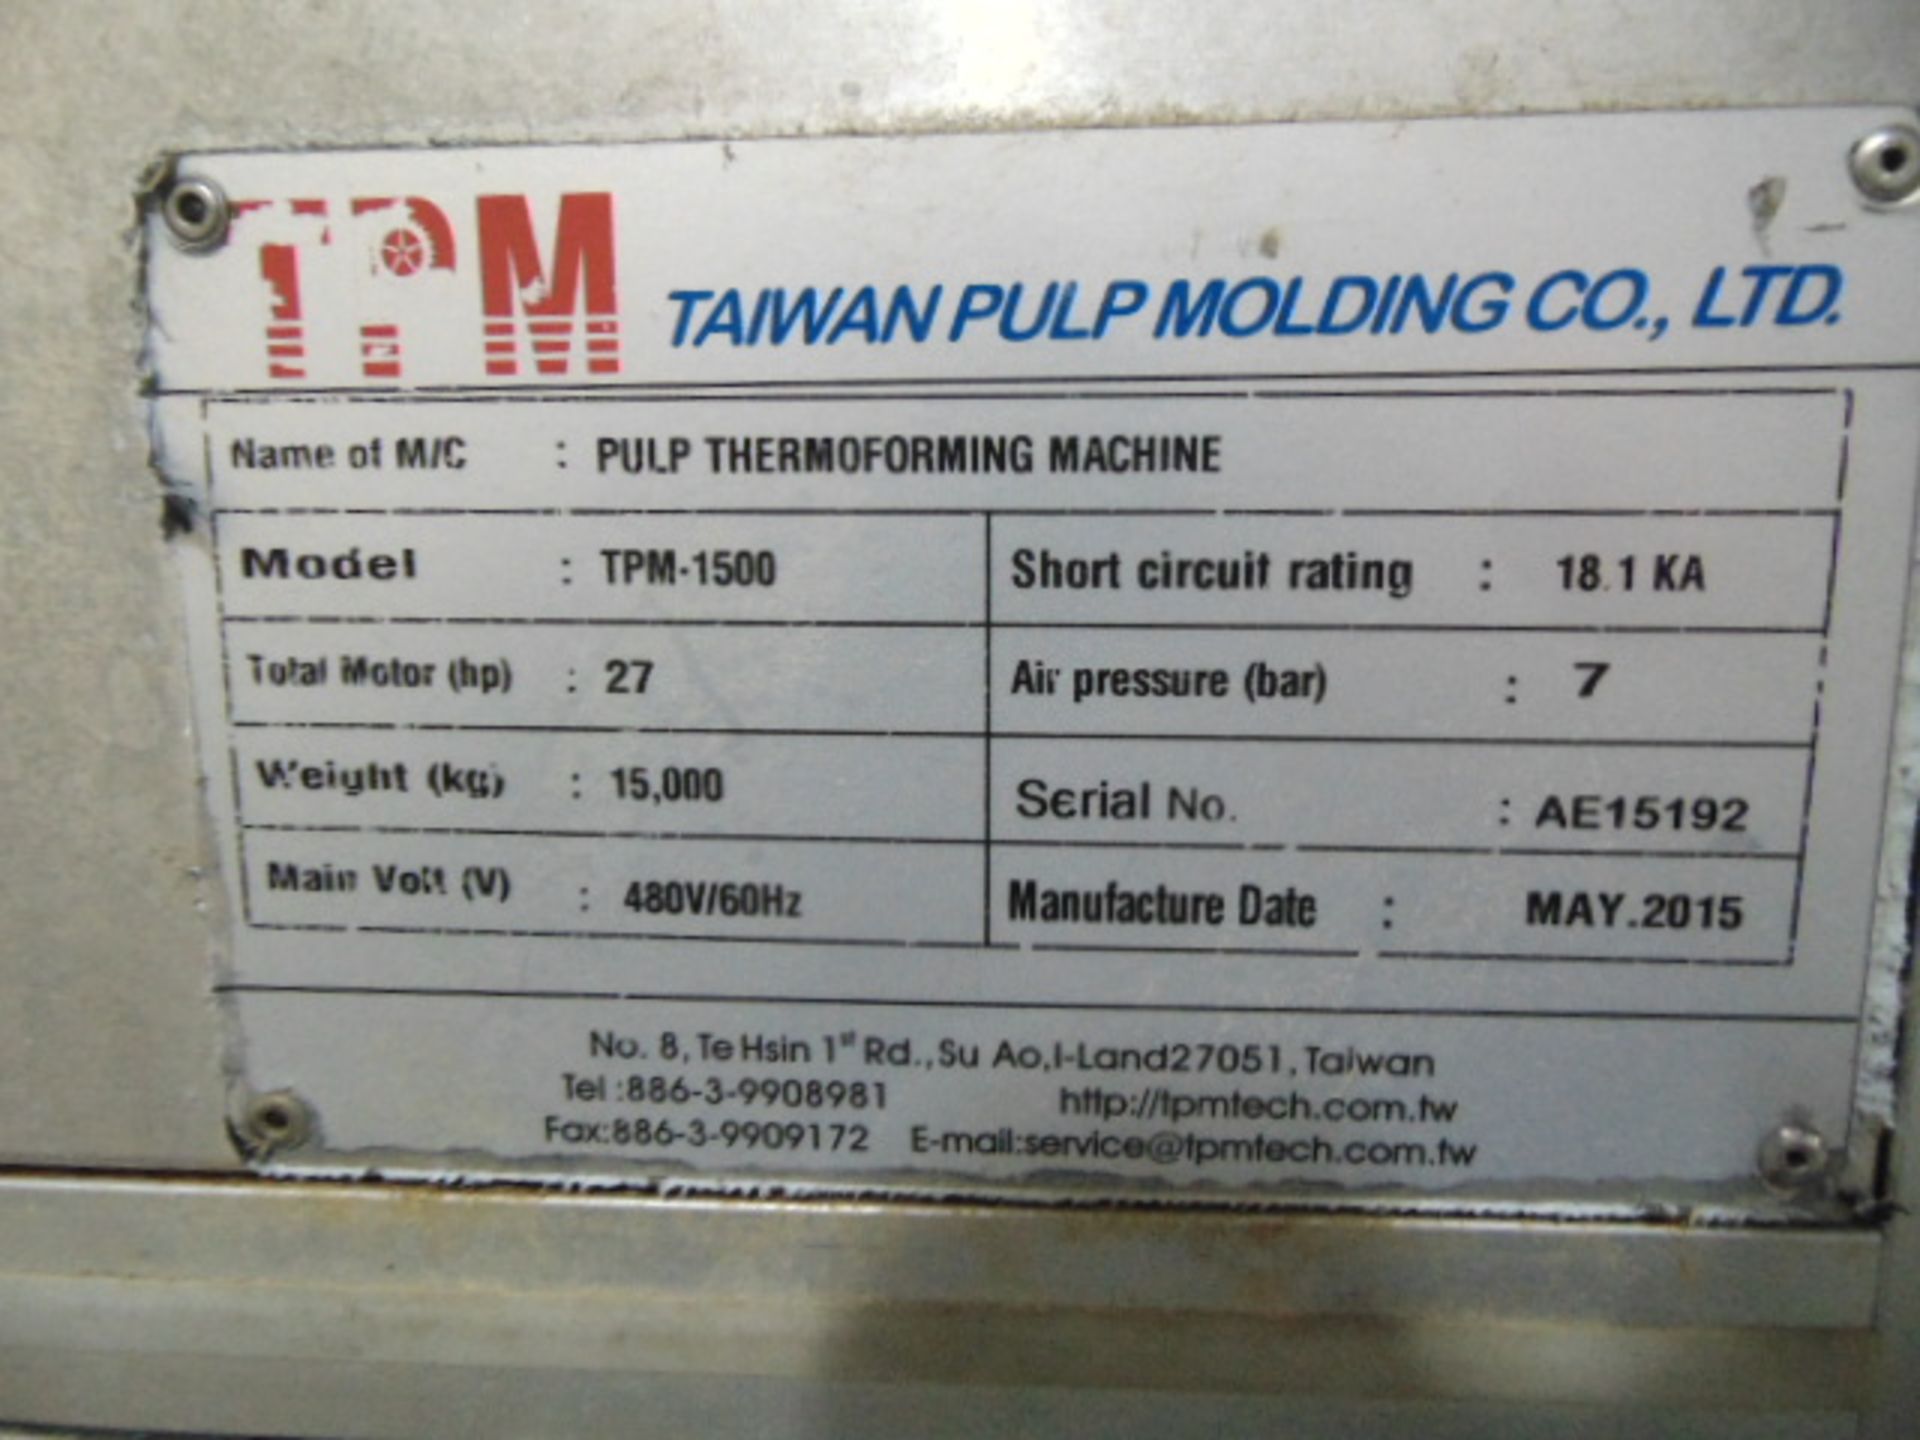 THERMOFORMING MACHINE, TAIWAN PULP MOLDING MDL. TPM-1500, mfg. 5/2015, installed 2016, 1500mm x - Image 8 of 12